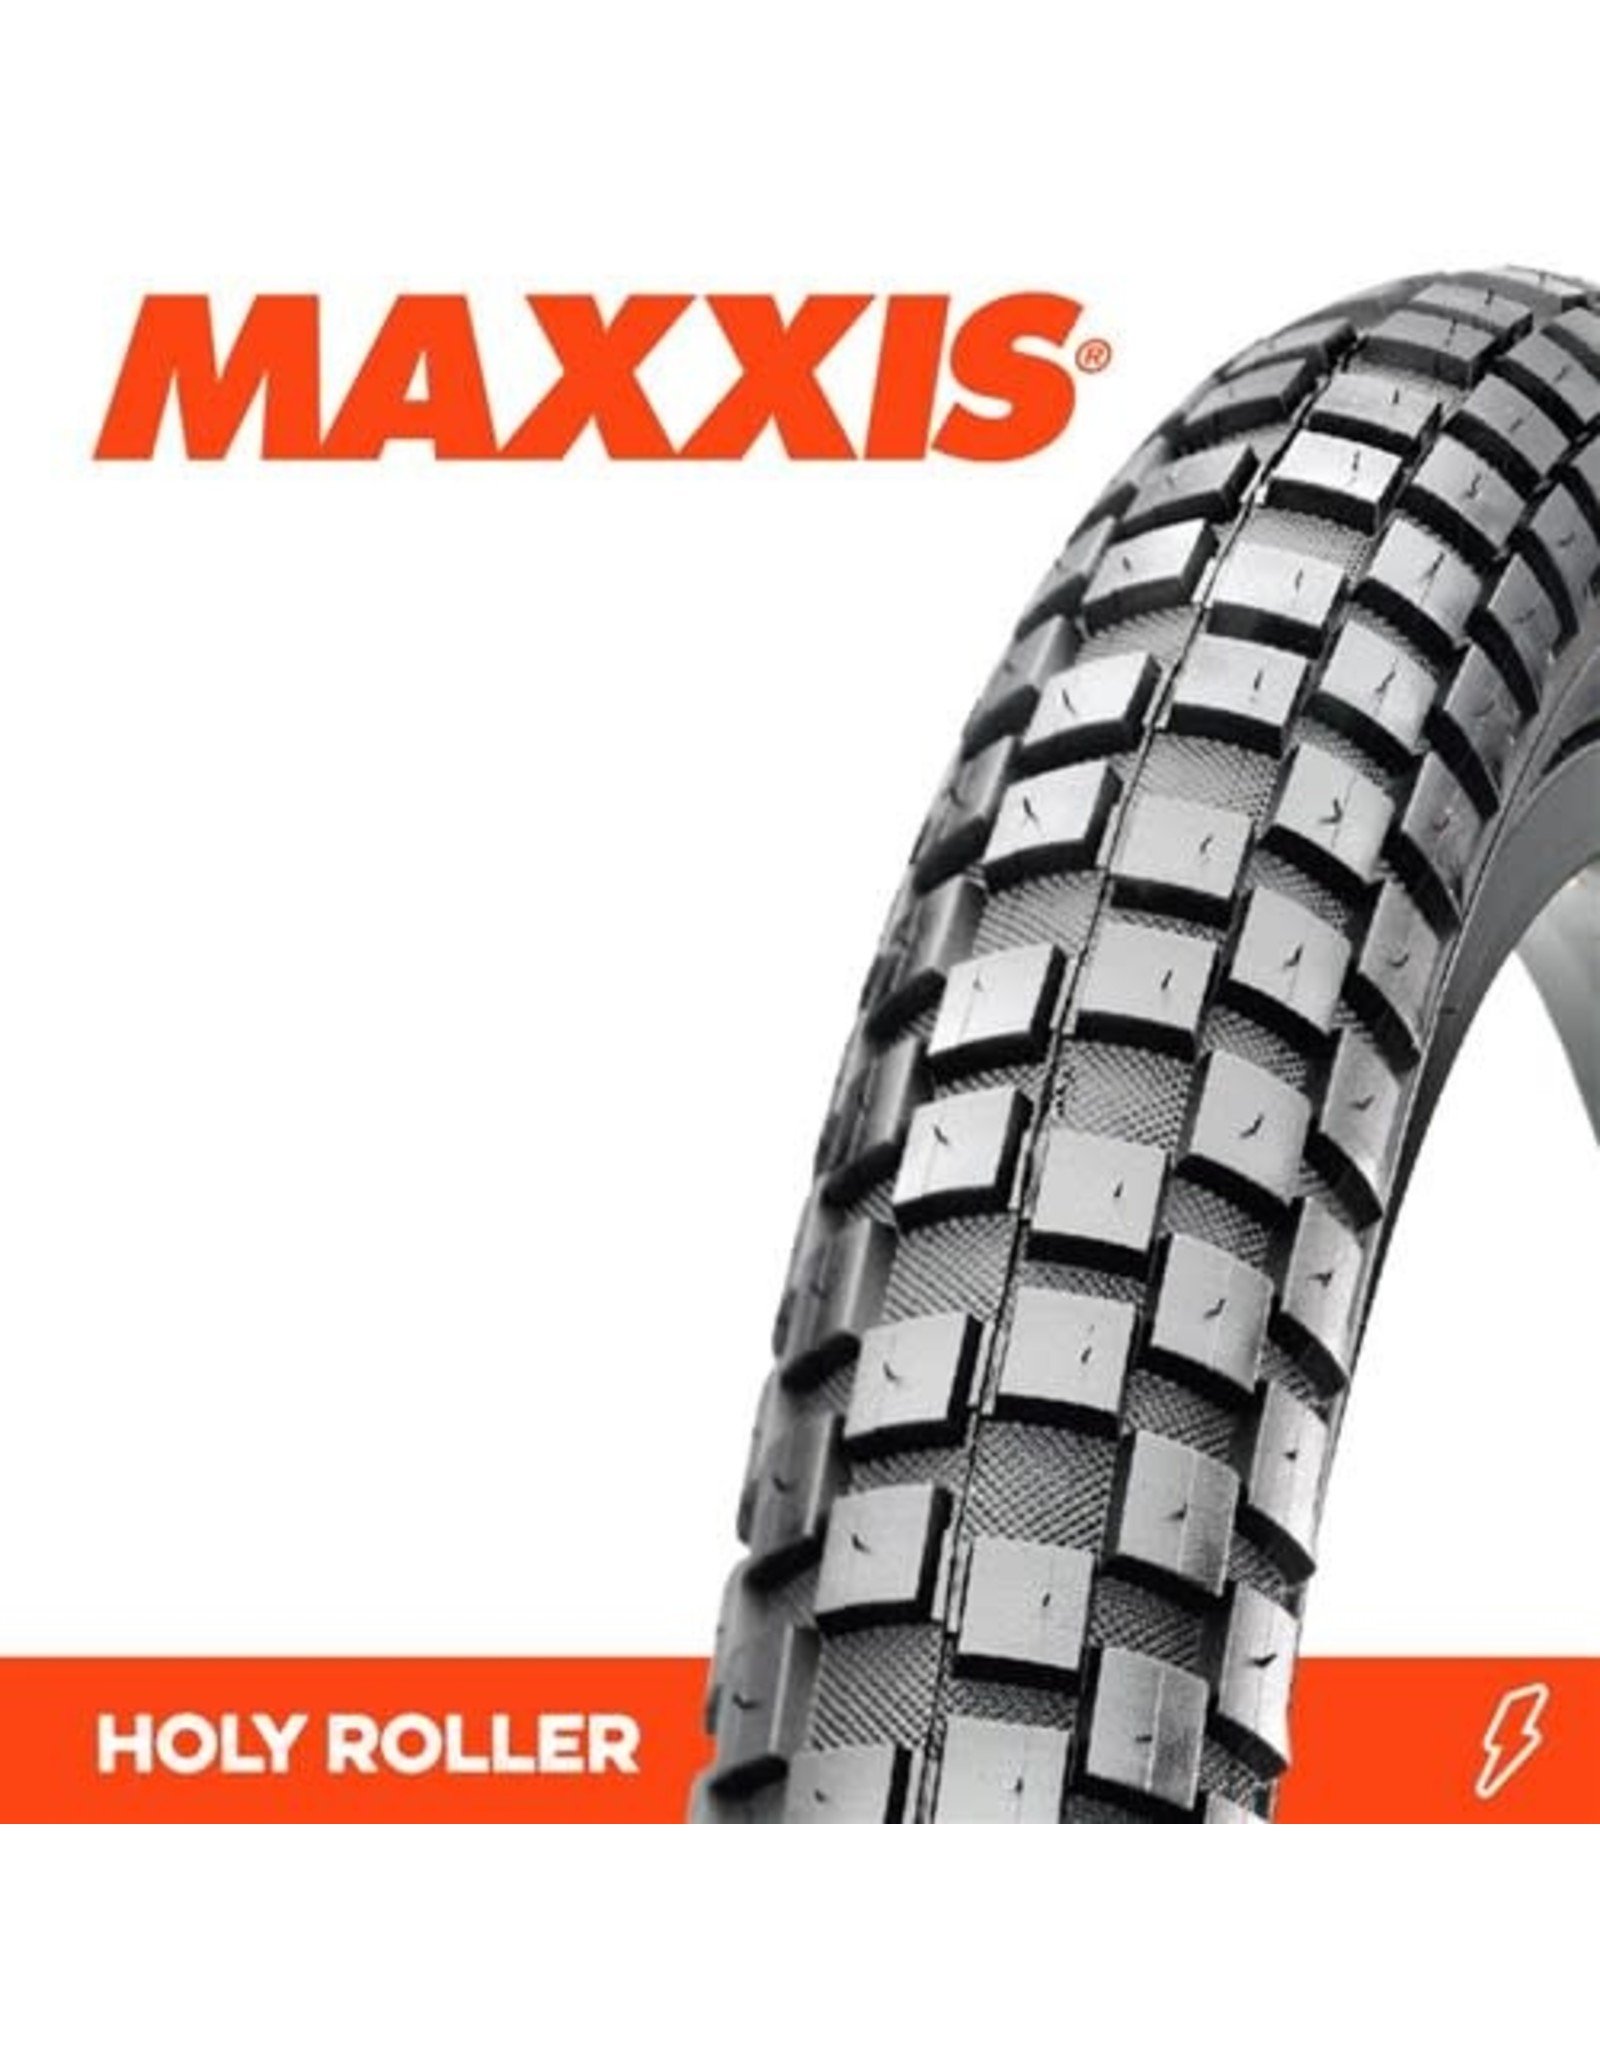 maxxis holy roller 26